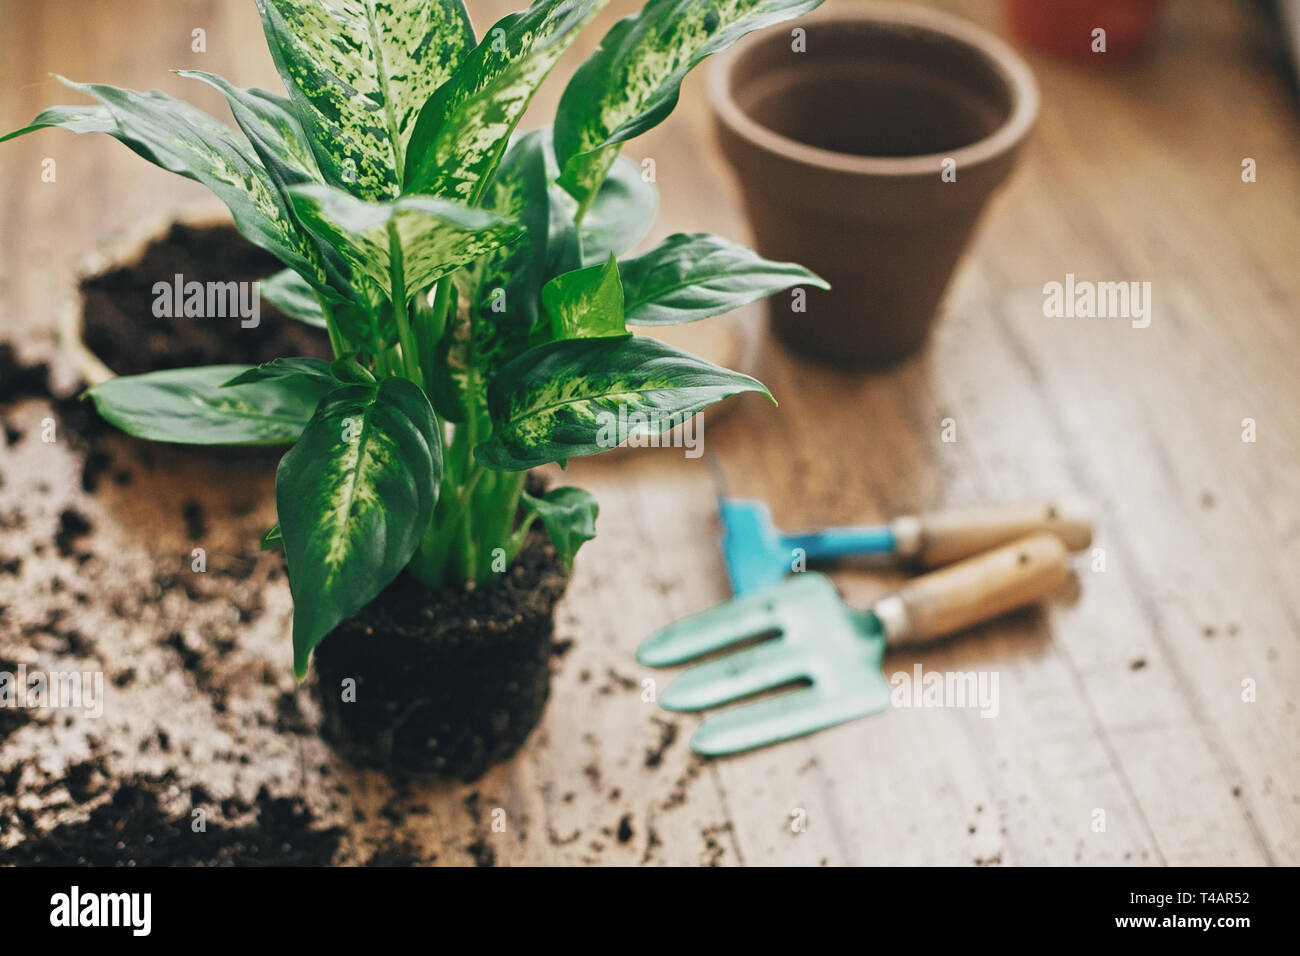 Repotting plant concept. Dumbcane plant in soil with gardening stylish tools, ground and clay pots on wooden floor. Preparing for repotting dieffenbac Stock Photo